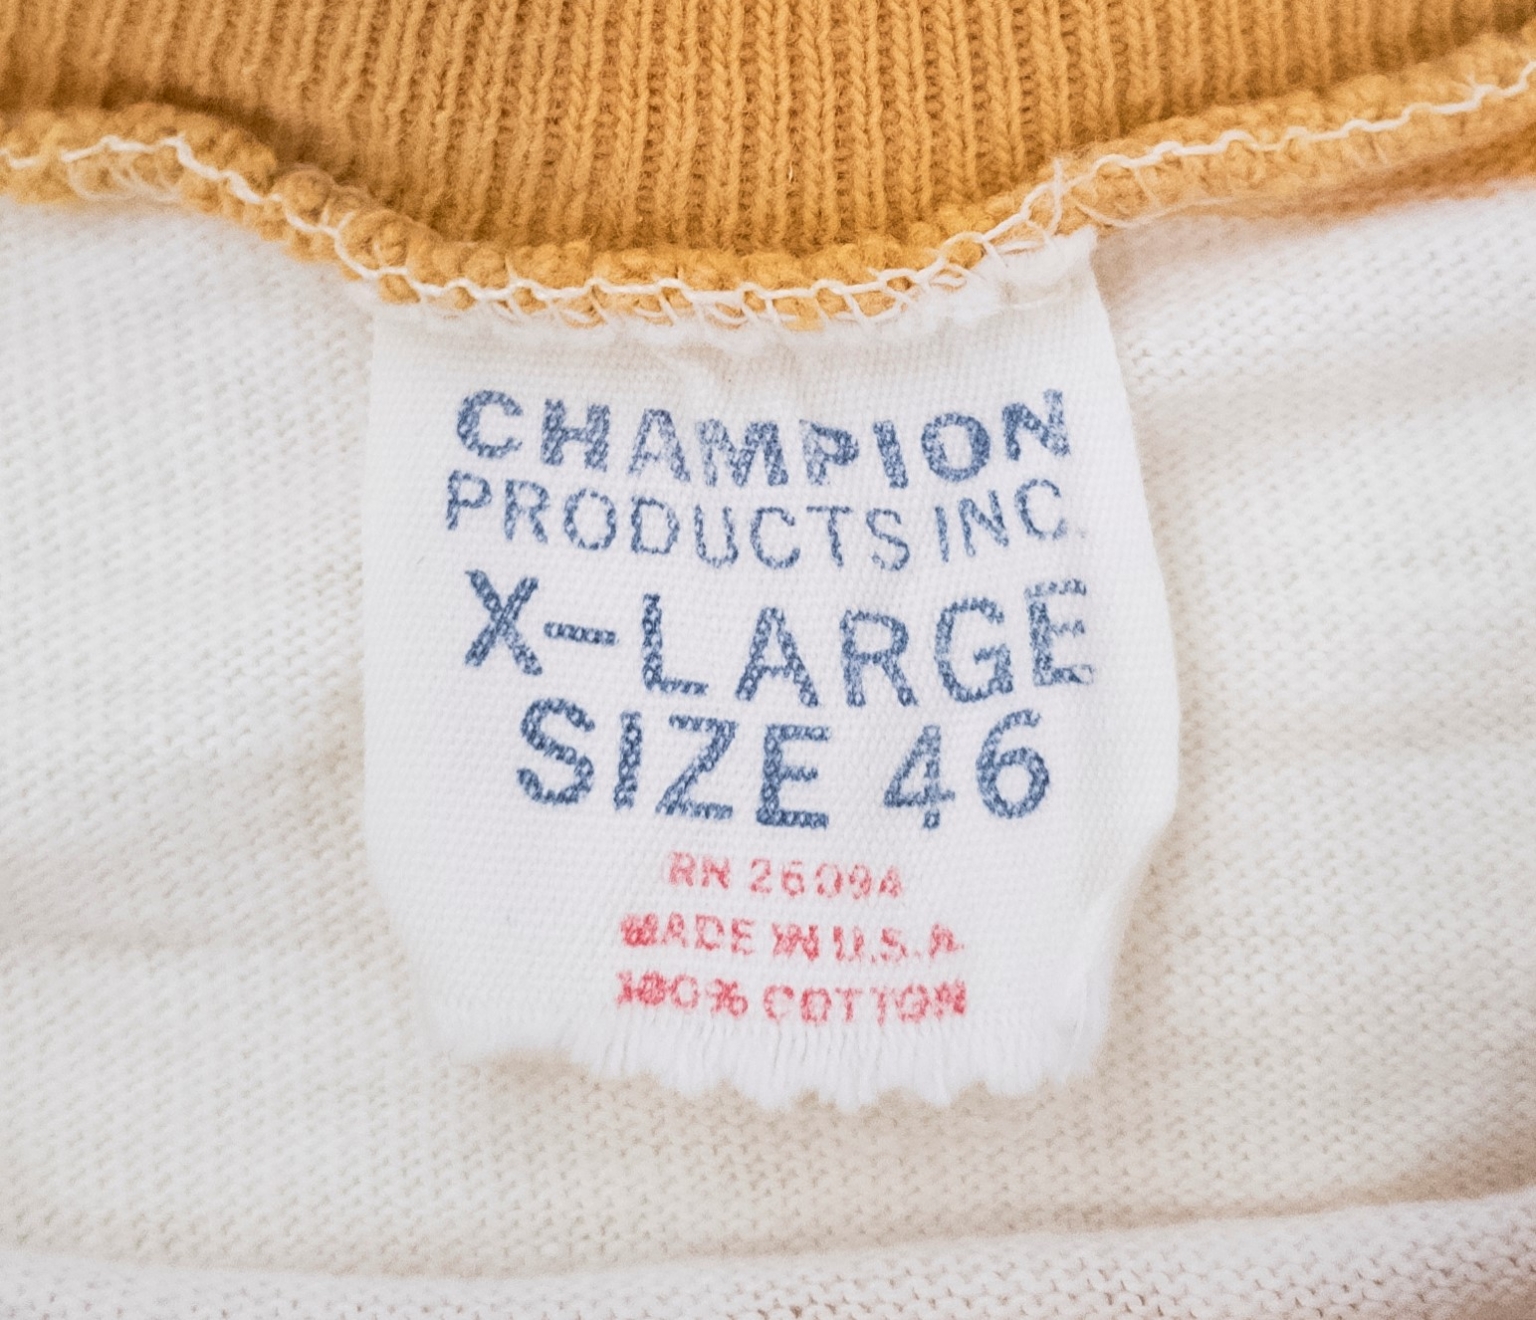 The History of Vintage Champion T-Shirt Tags (1967-2000s)